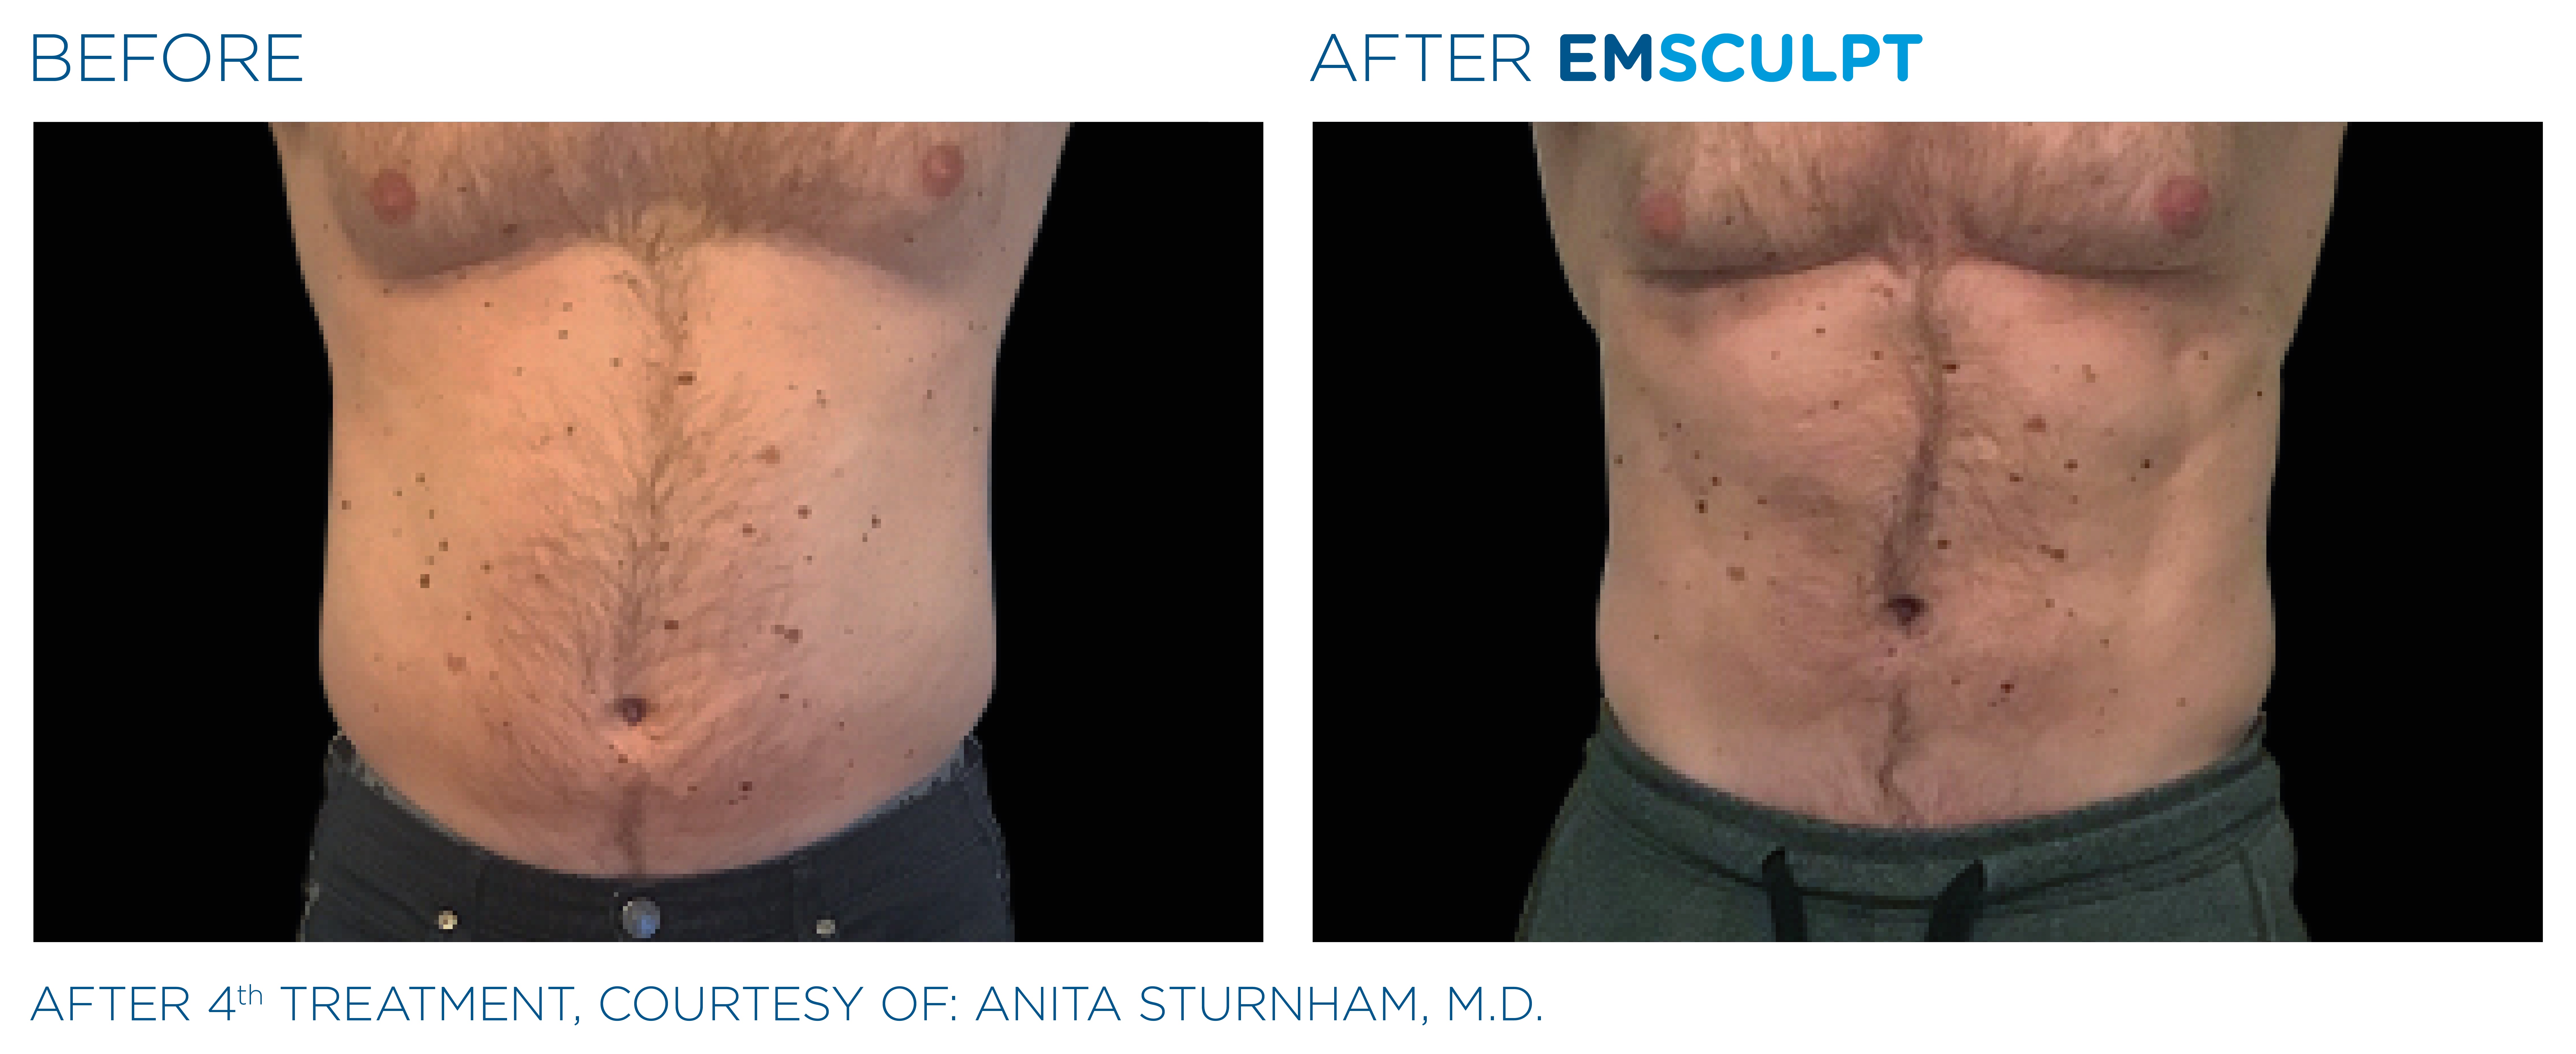 Man Stomach Emsculpt Before and After